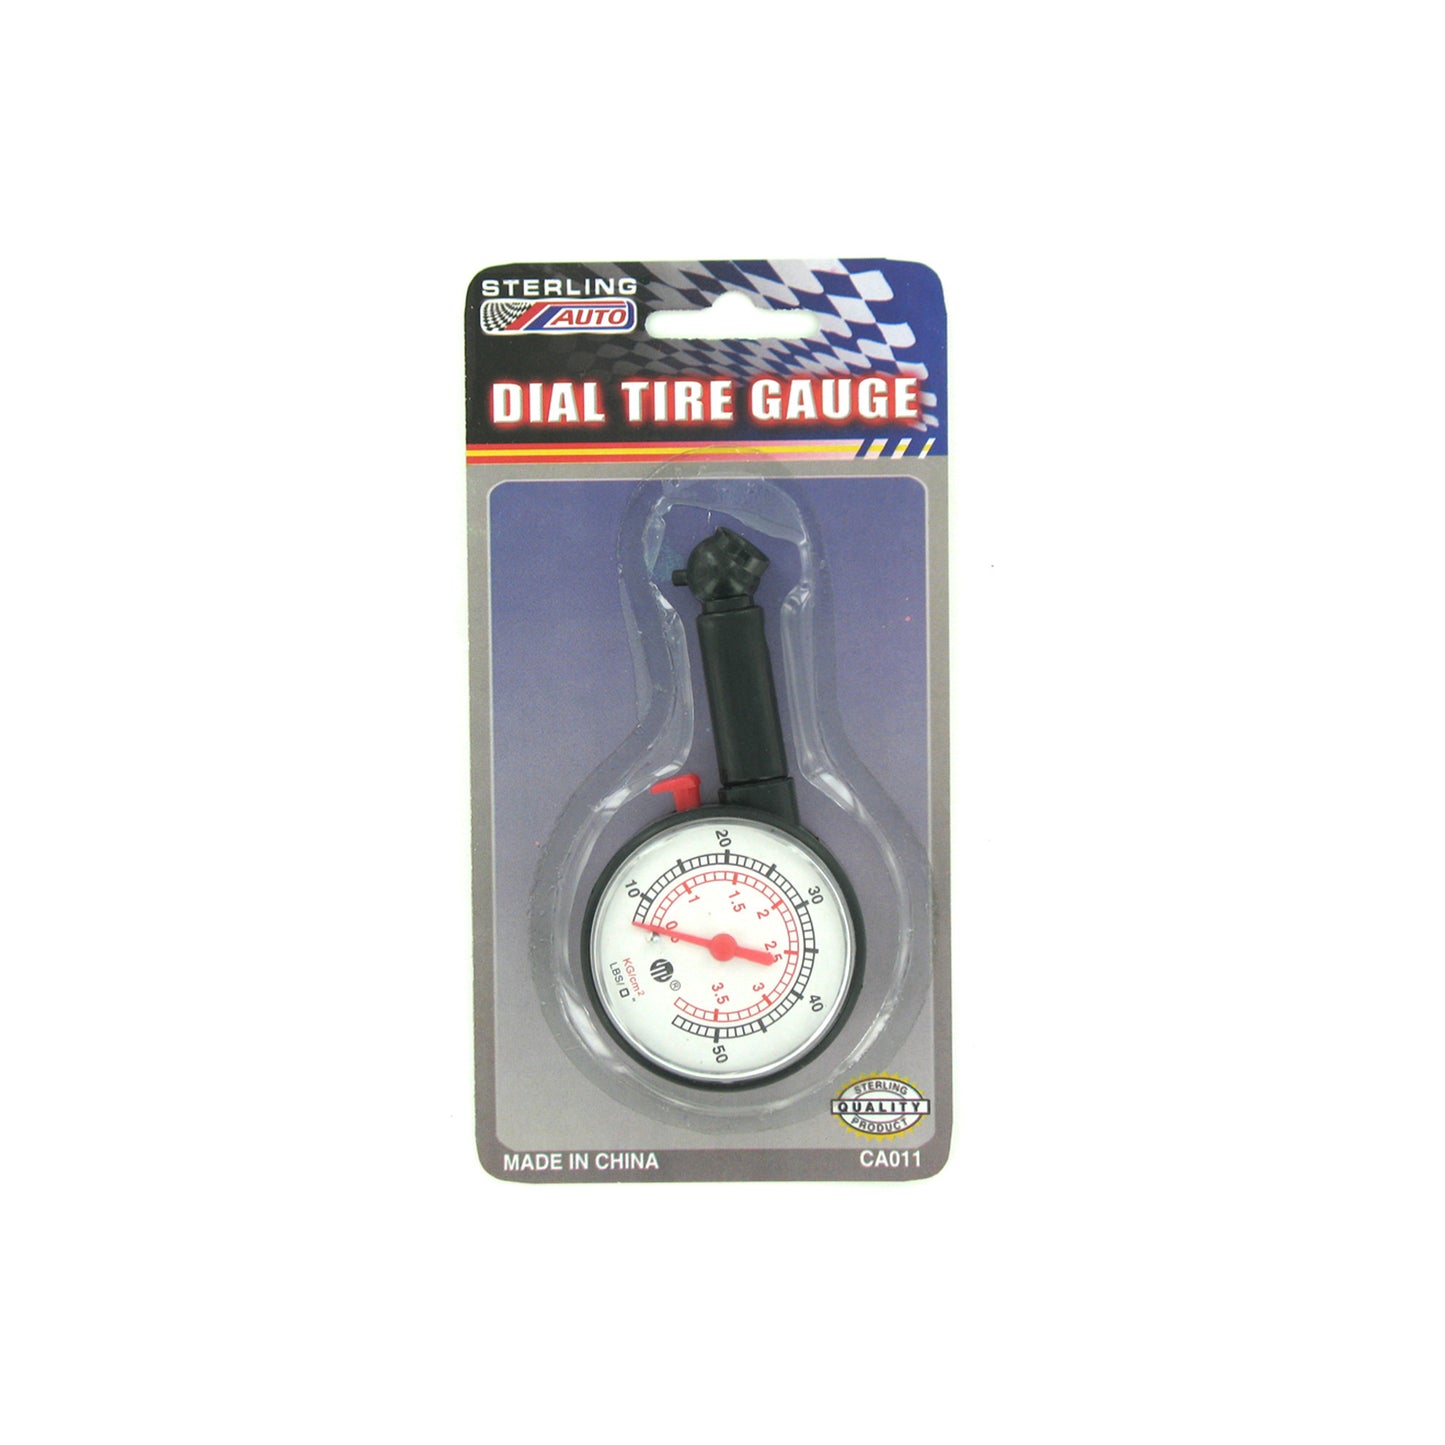 dial tire gauge  - vehicle parts and accessories -- 23 per box